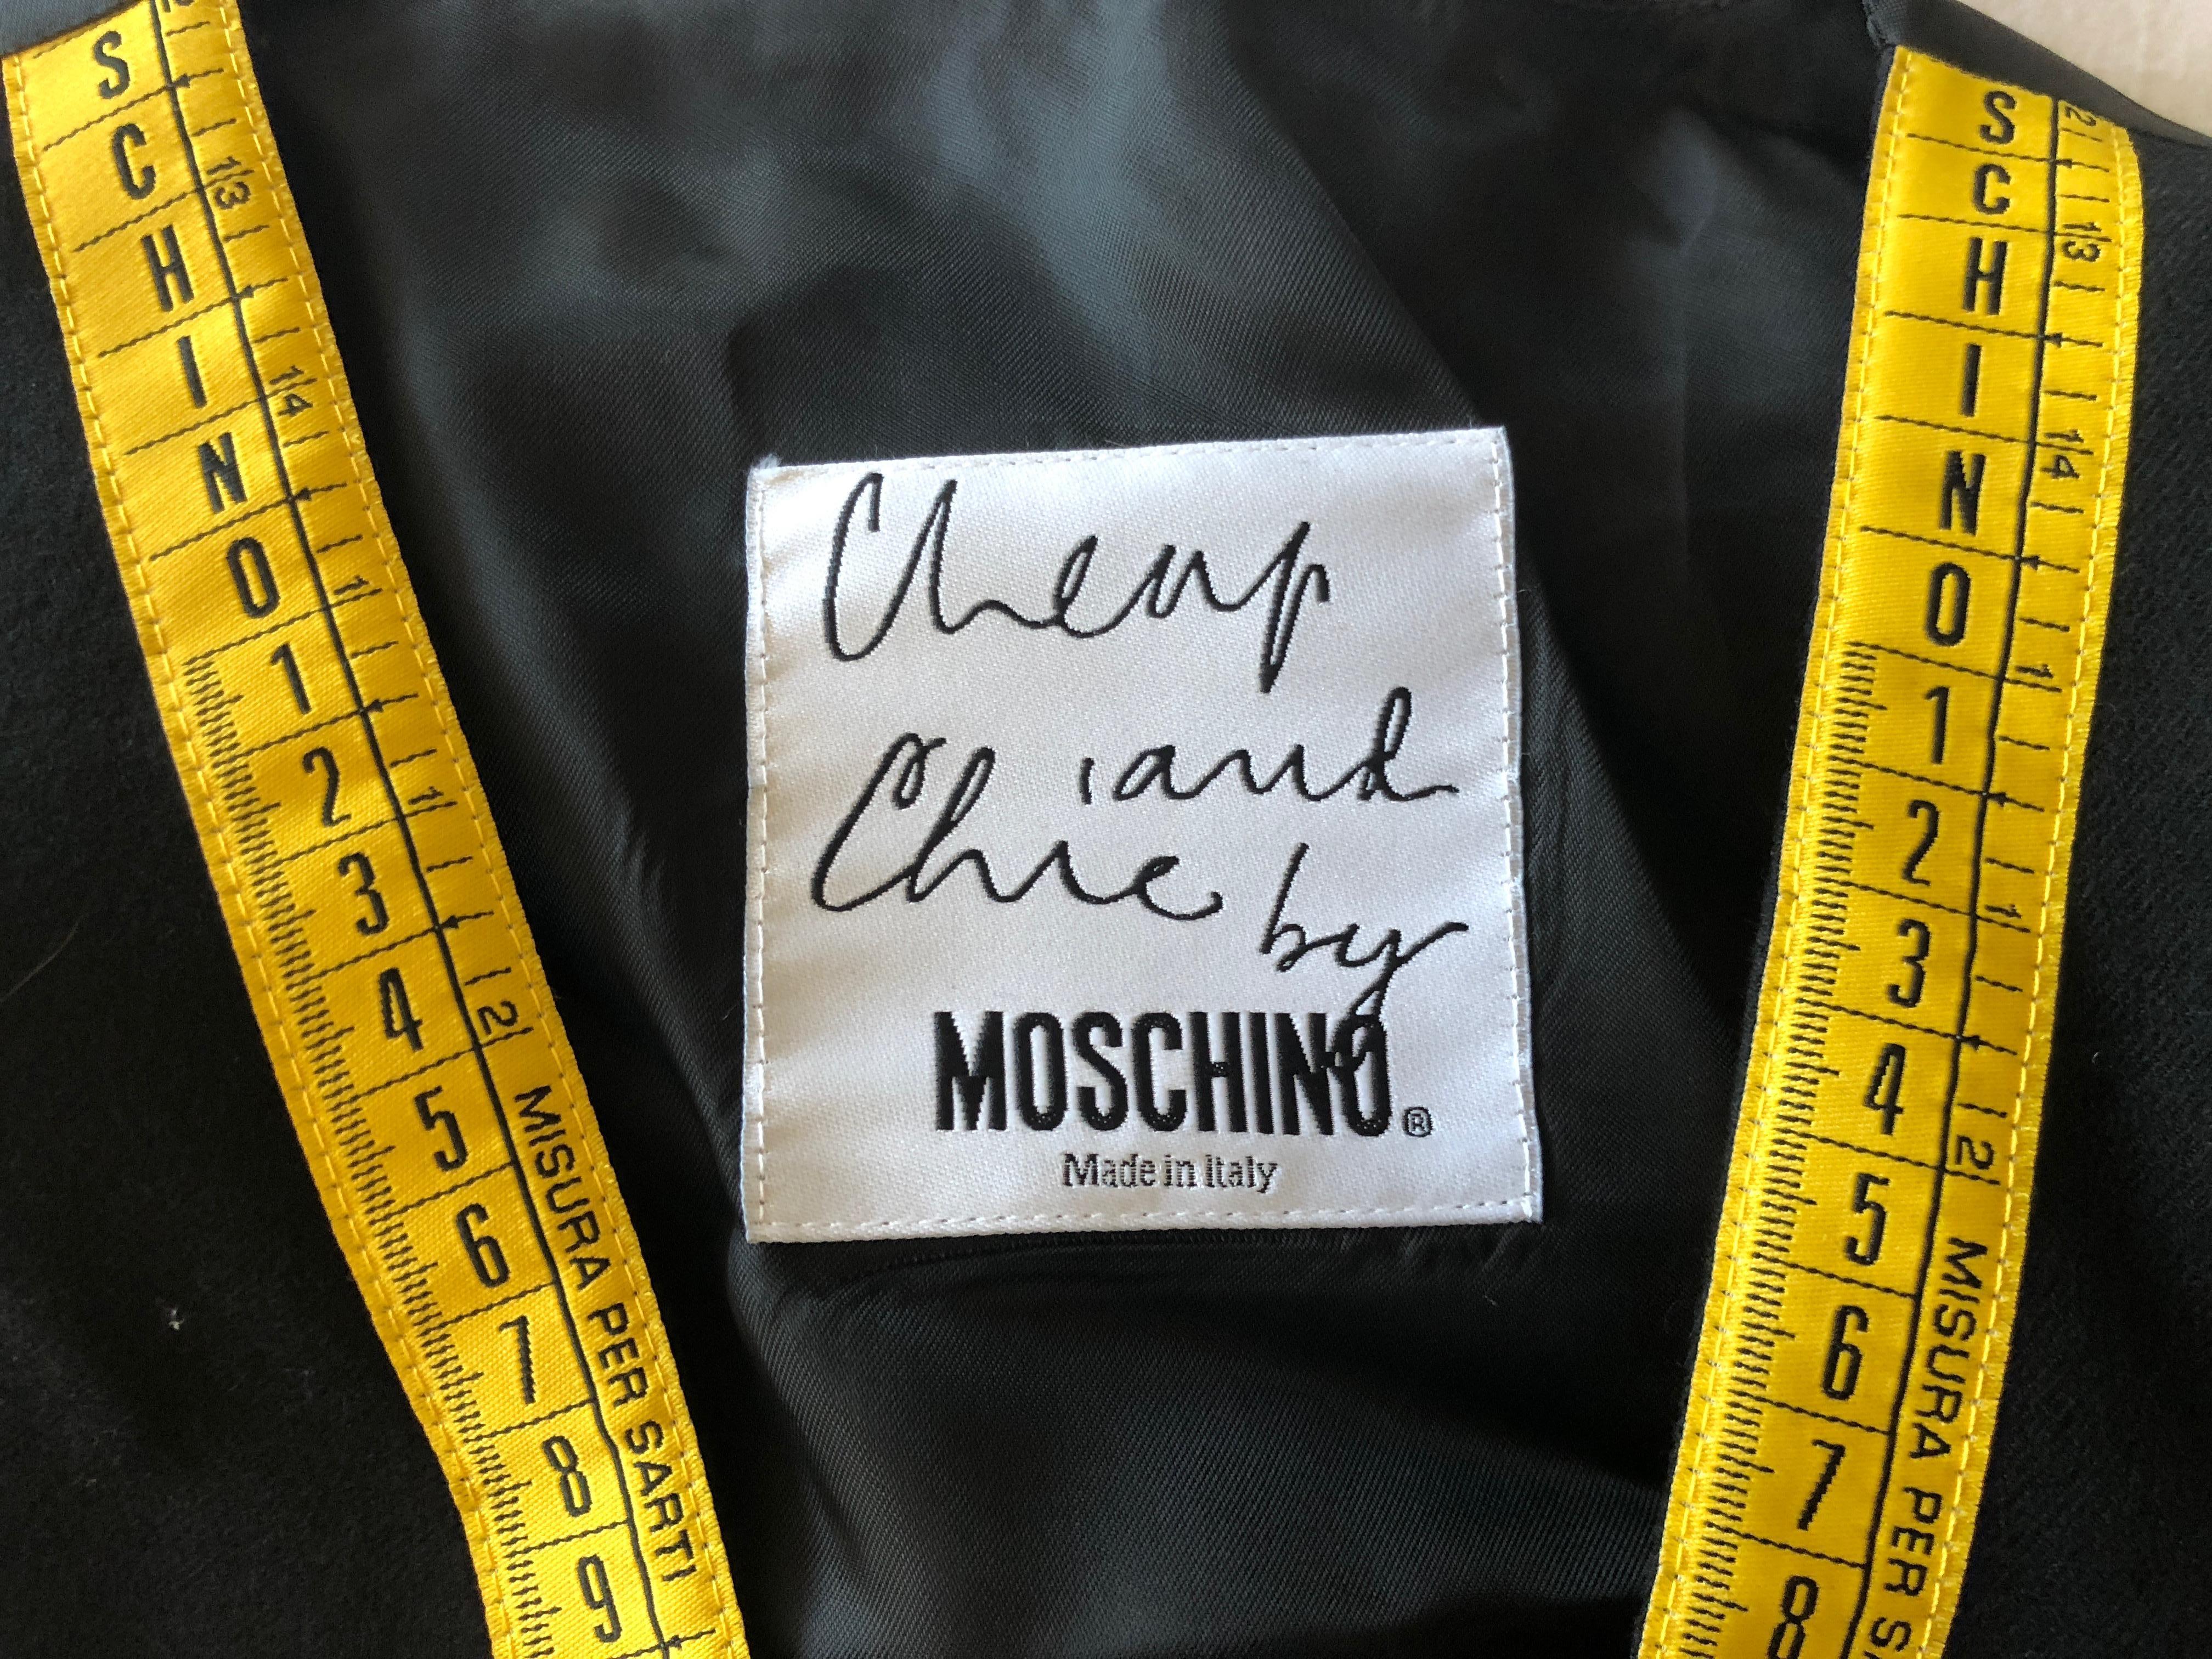 Moschino 1989 Cheap & Chic Iconic Vintage Mens Tape Measure Jacket and Vest For Sale 7